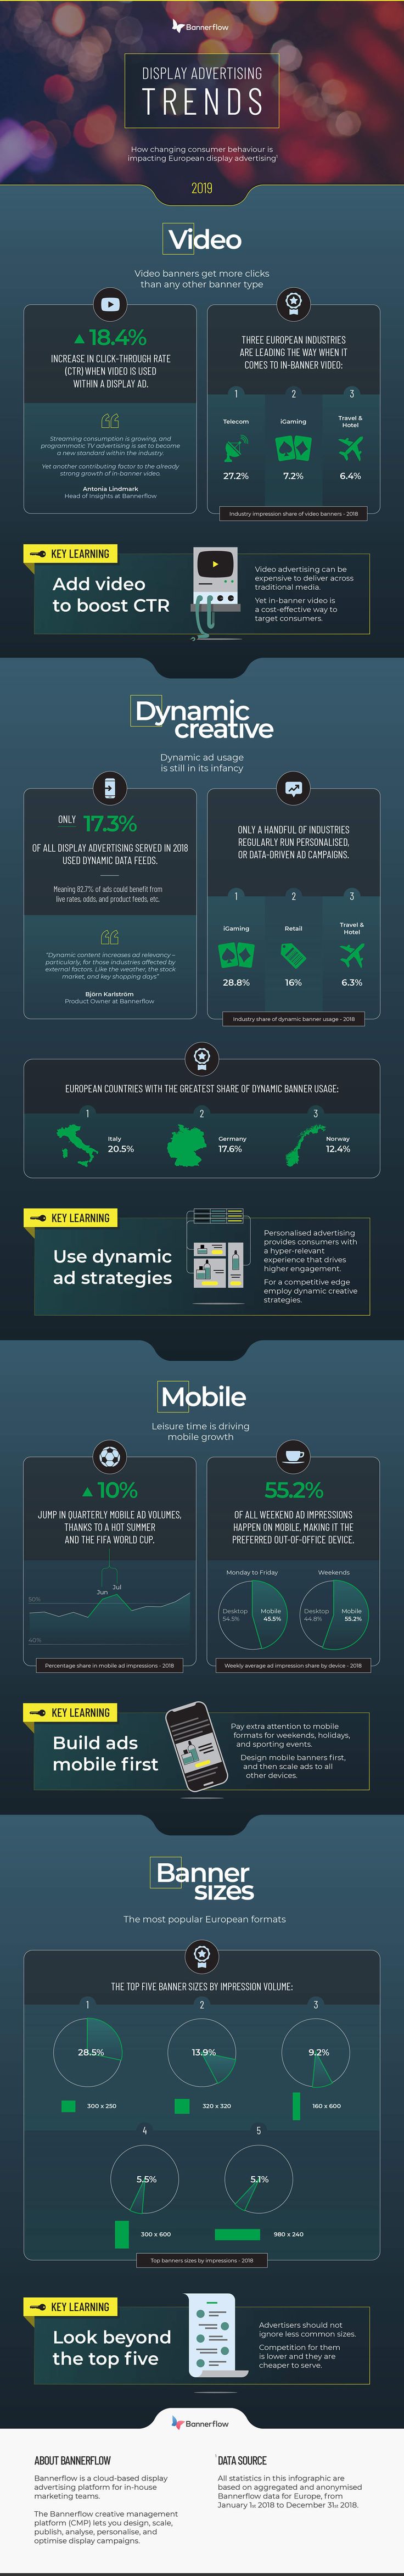 Advertising-Infographics-The-Display-Advertising-Trends-of-2019-Infographic Advertising Infographics : The Display Advertising Trends of 2019 [Infographic]